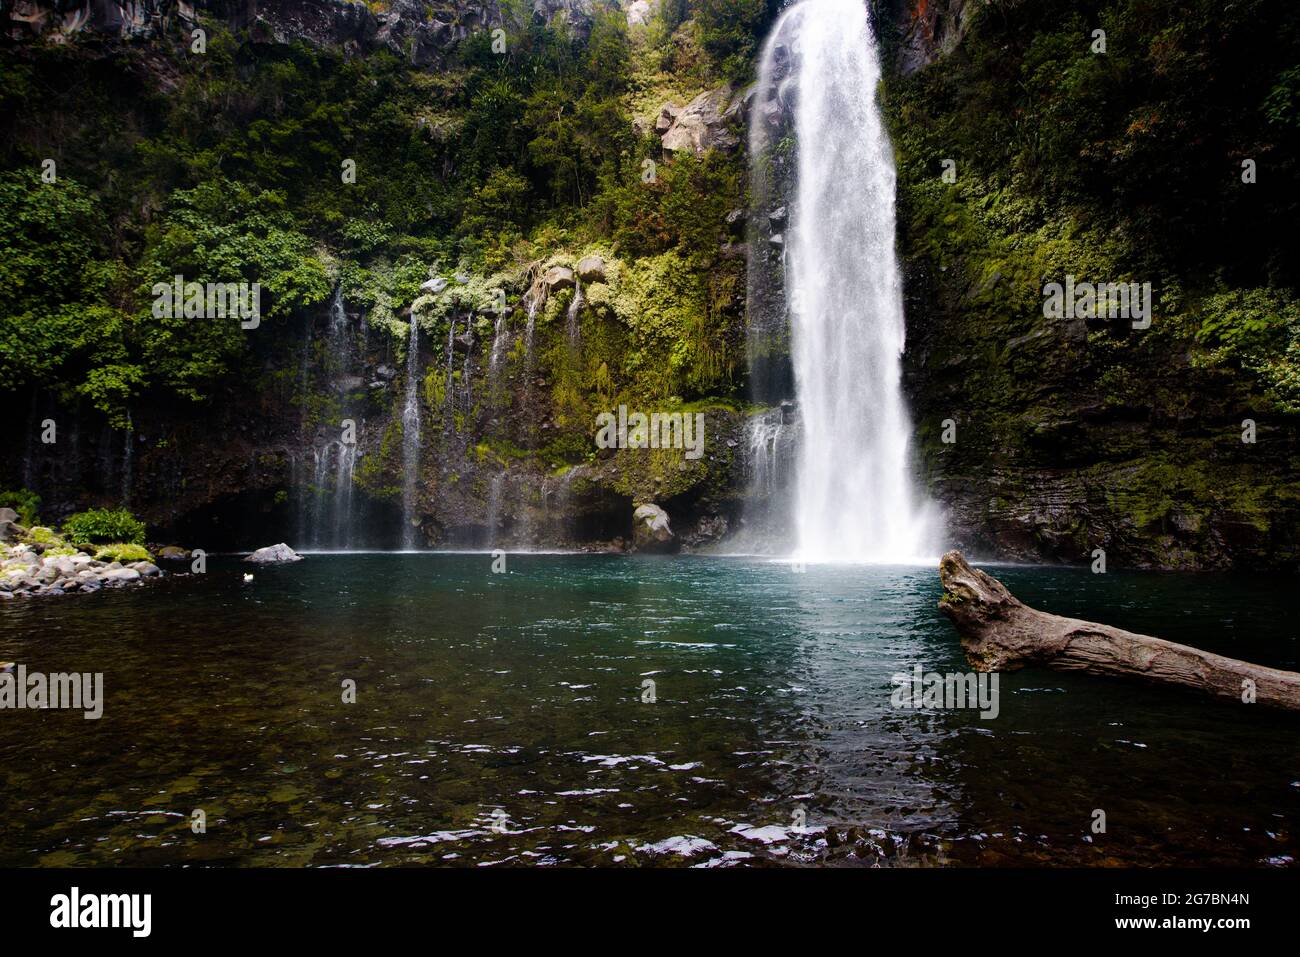 Grand bassin waterfall and its pool Stock Photo